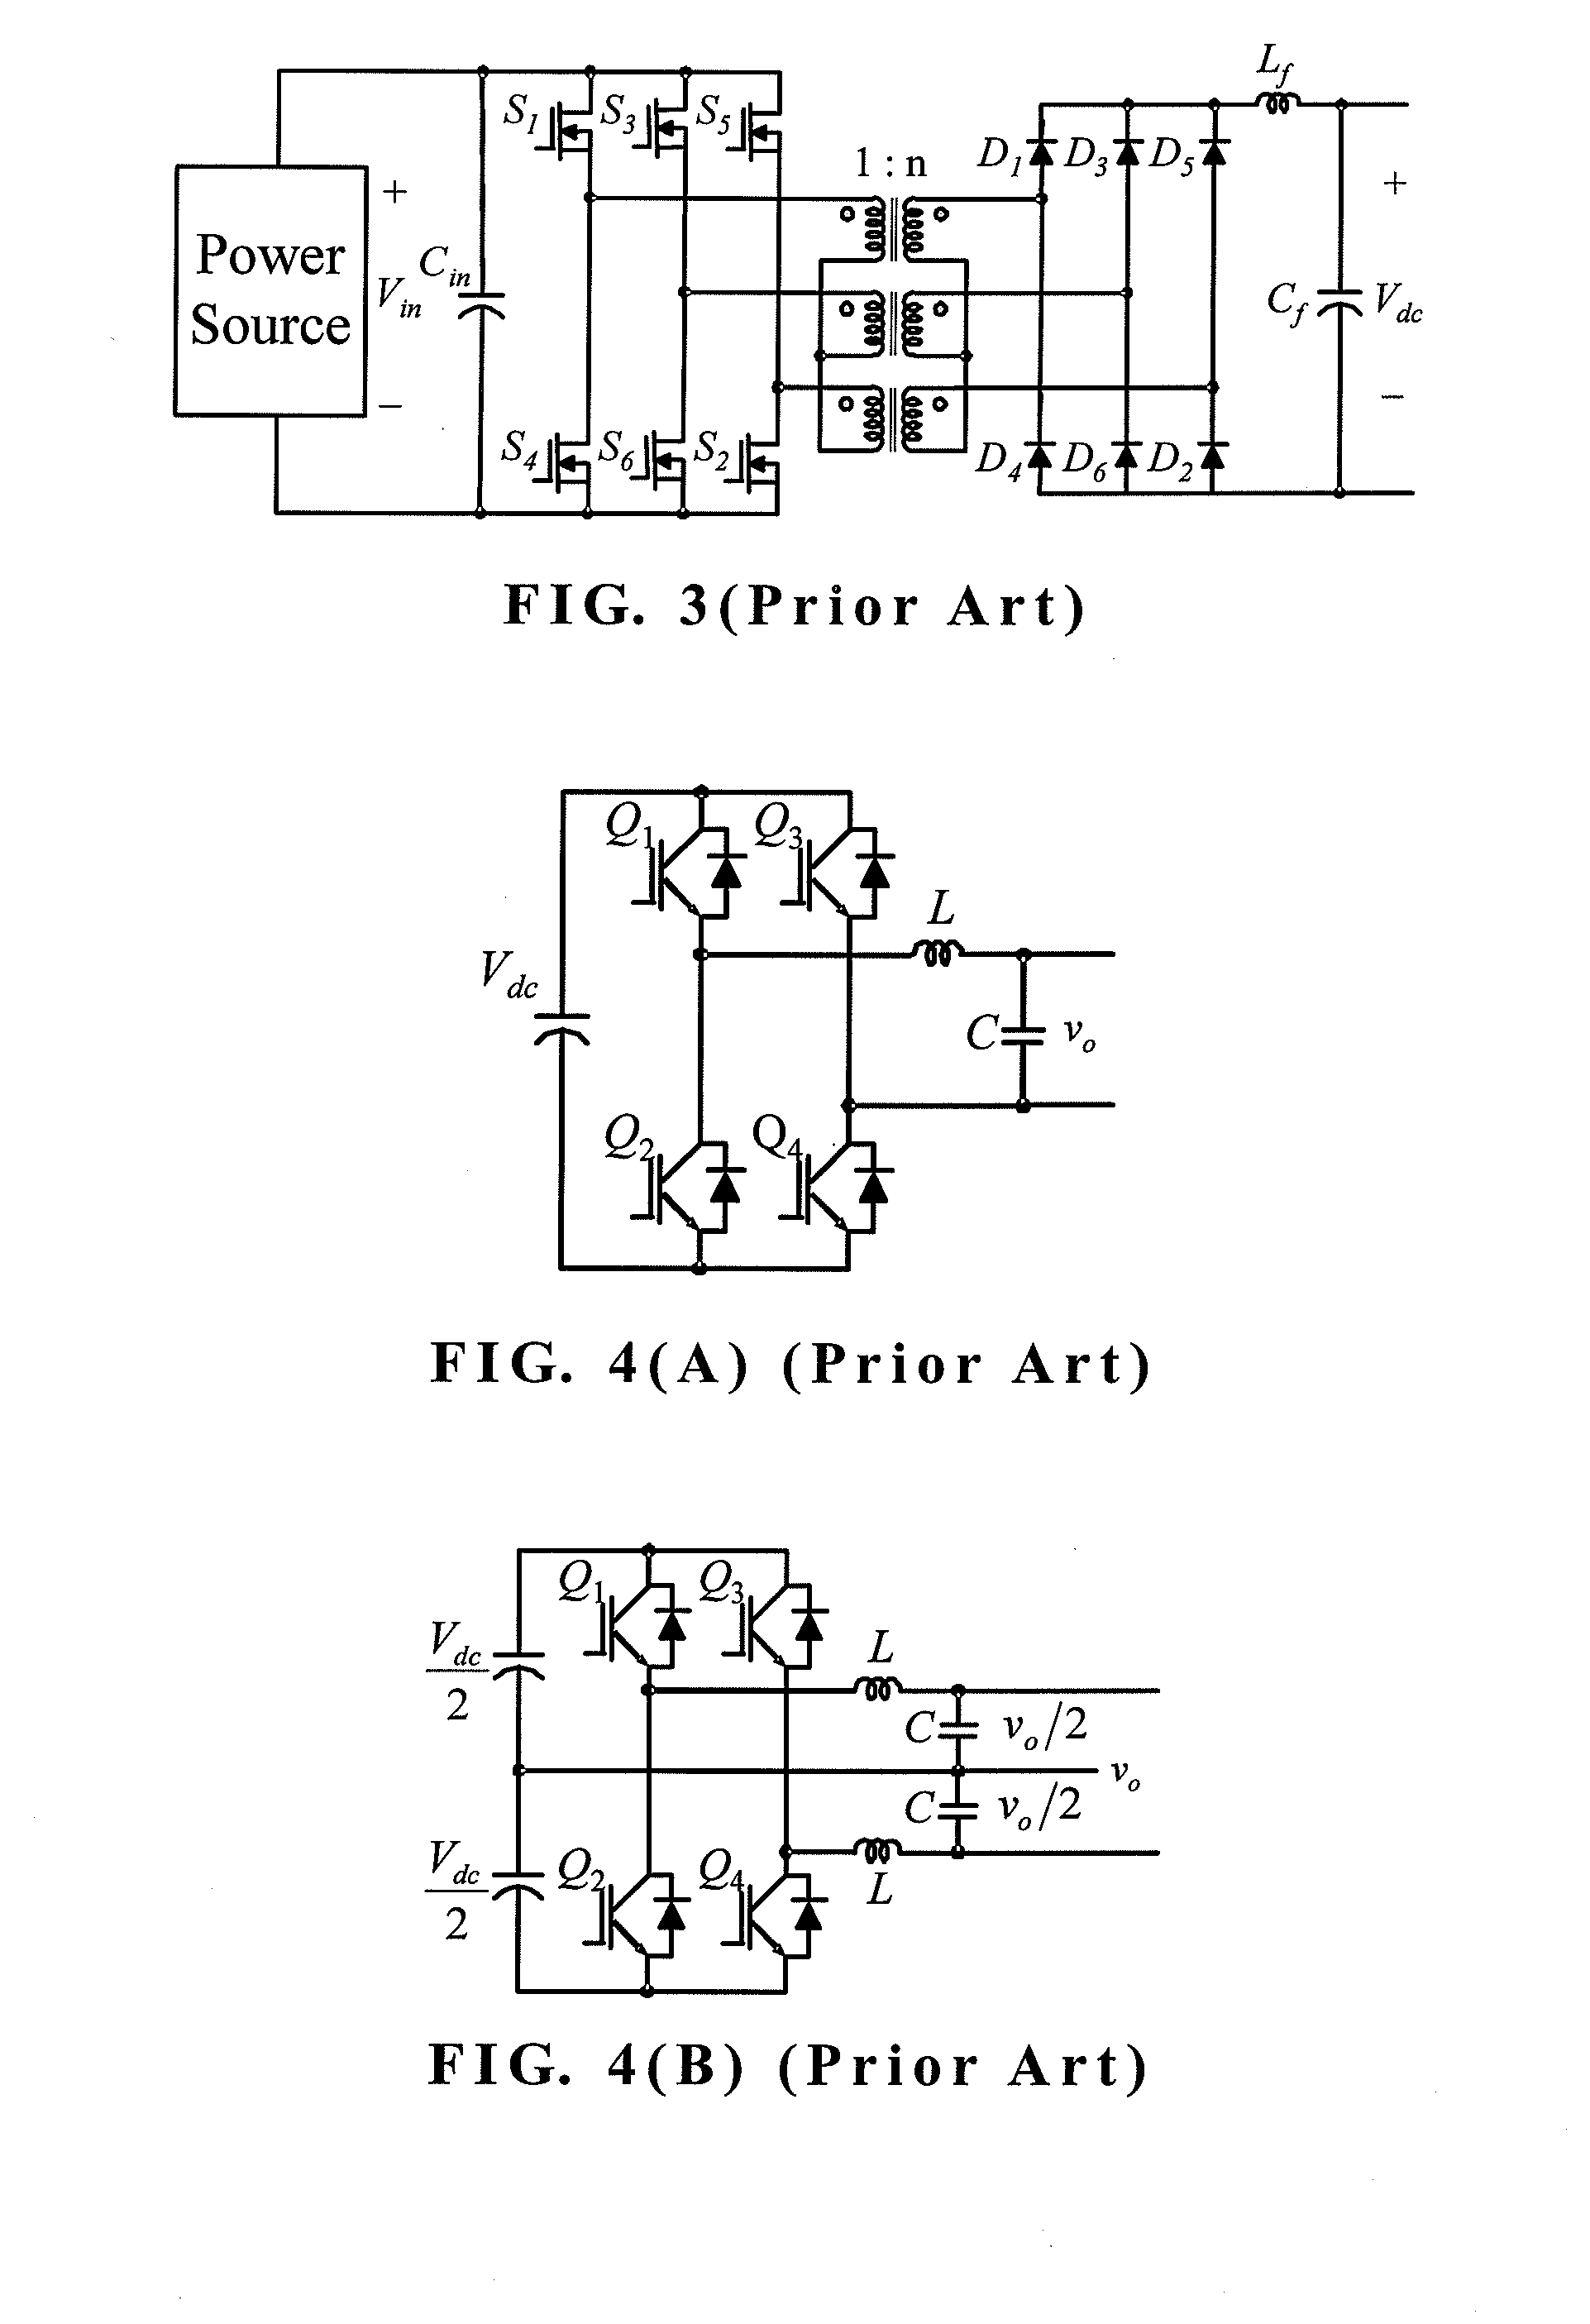 Paralleled power conditioning system with circulating current filter